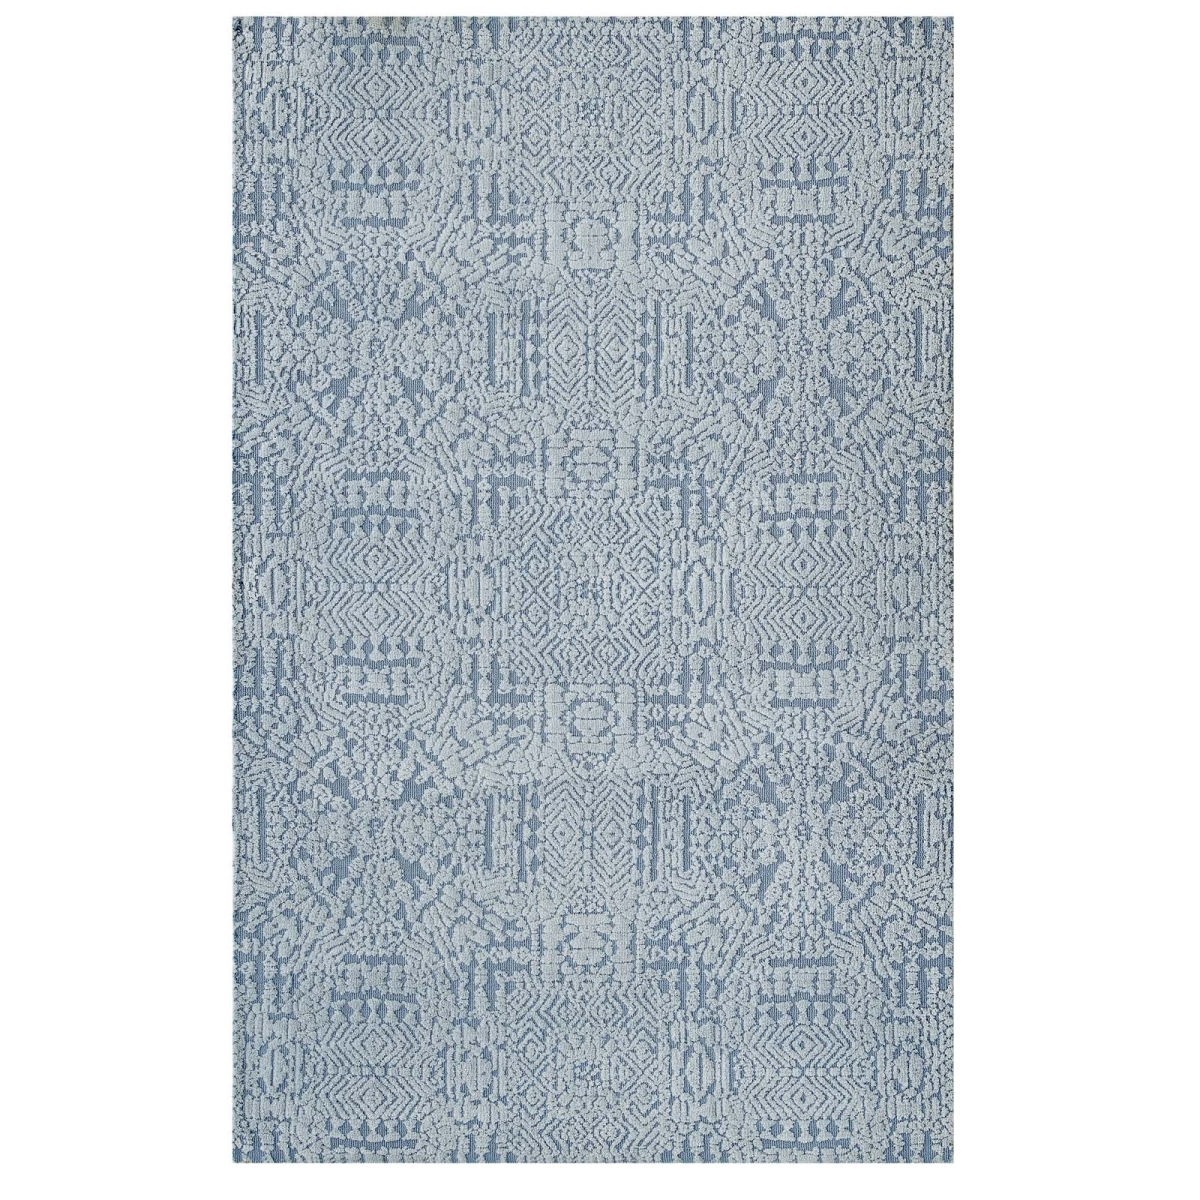 R-1018a-58 5 X 8 Ft. Javiera Contemporary Moroccan Polyester Area Rug - Ivory & Light Blue, 0.5 X 60 X 96 In.